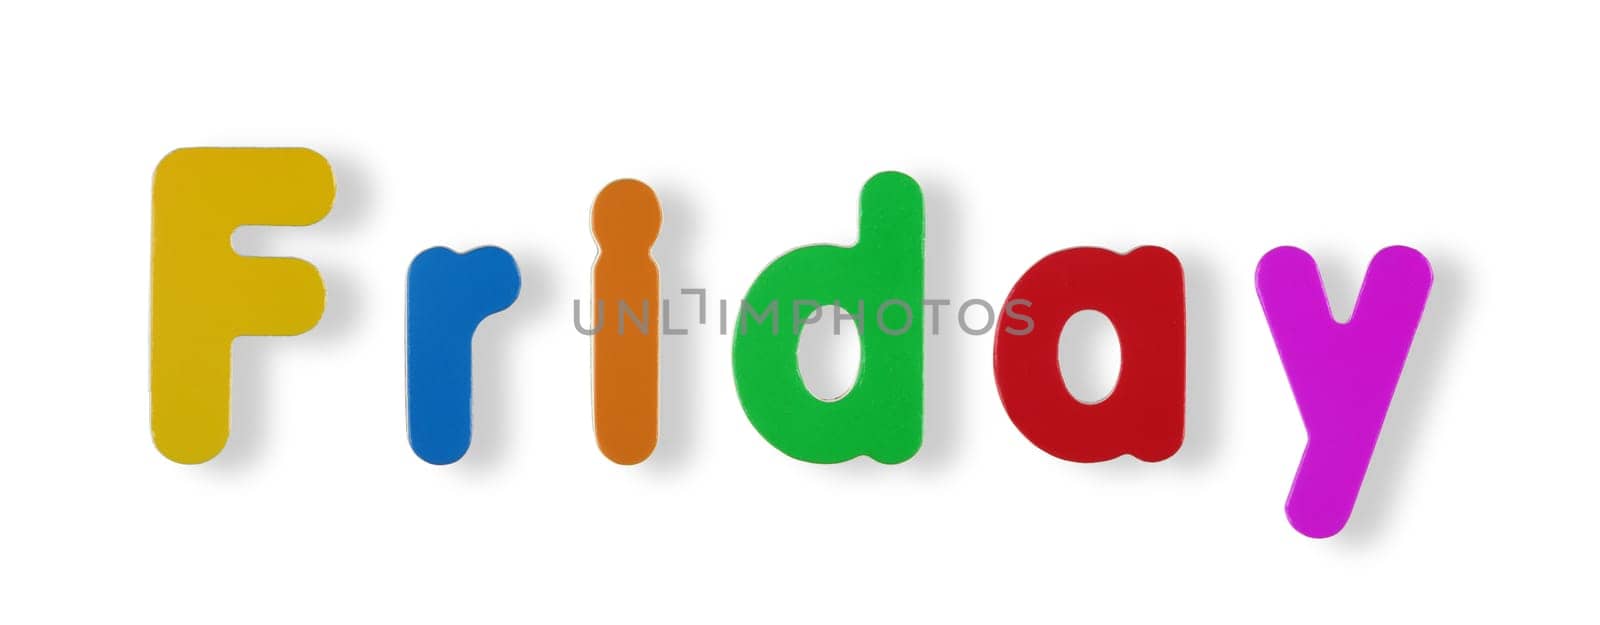 Friday word in coloured magnetic letters with clipping path by VivacityImages